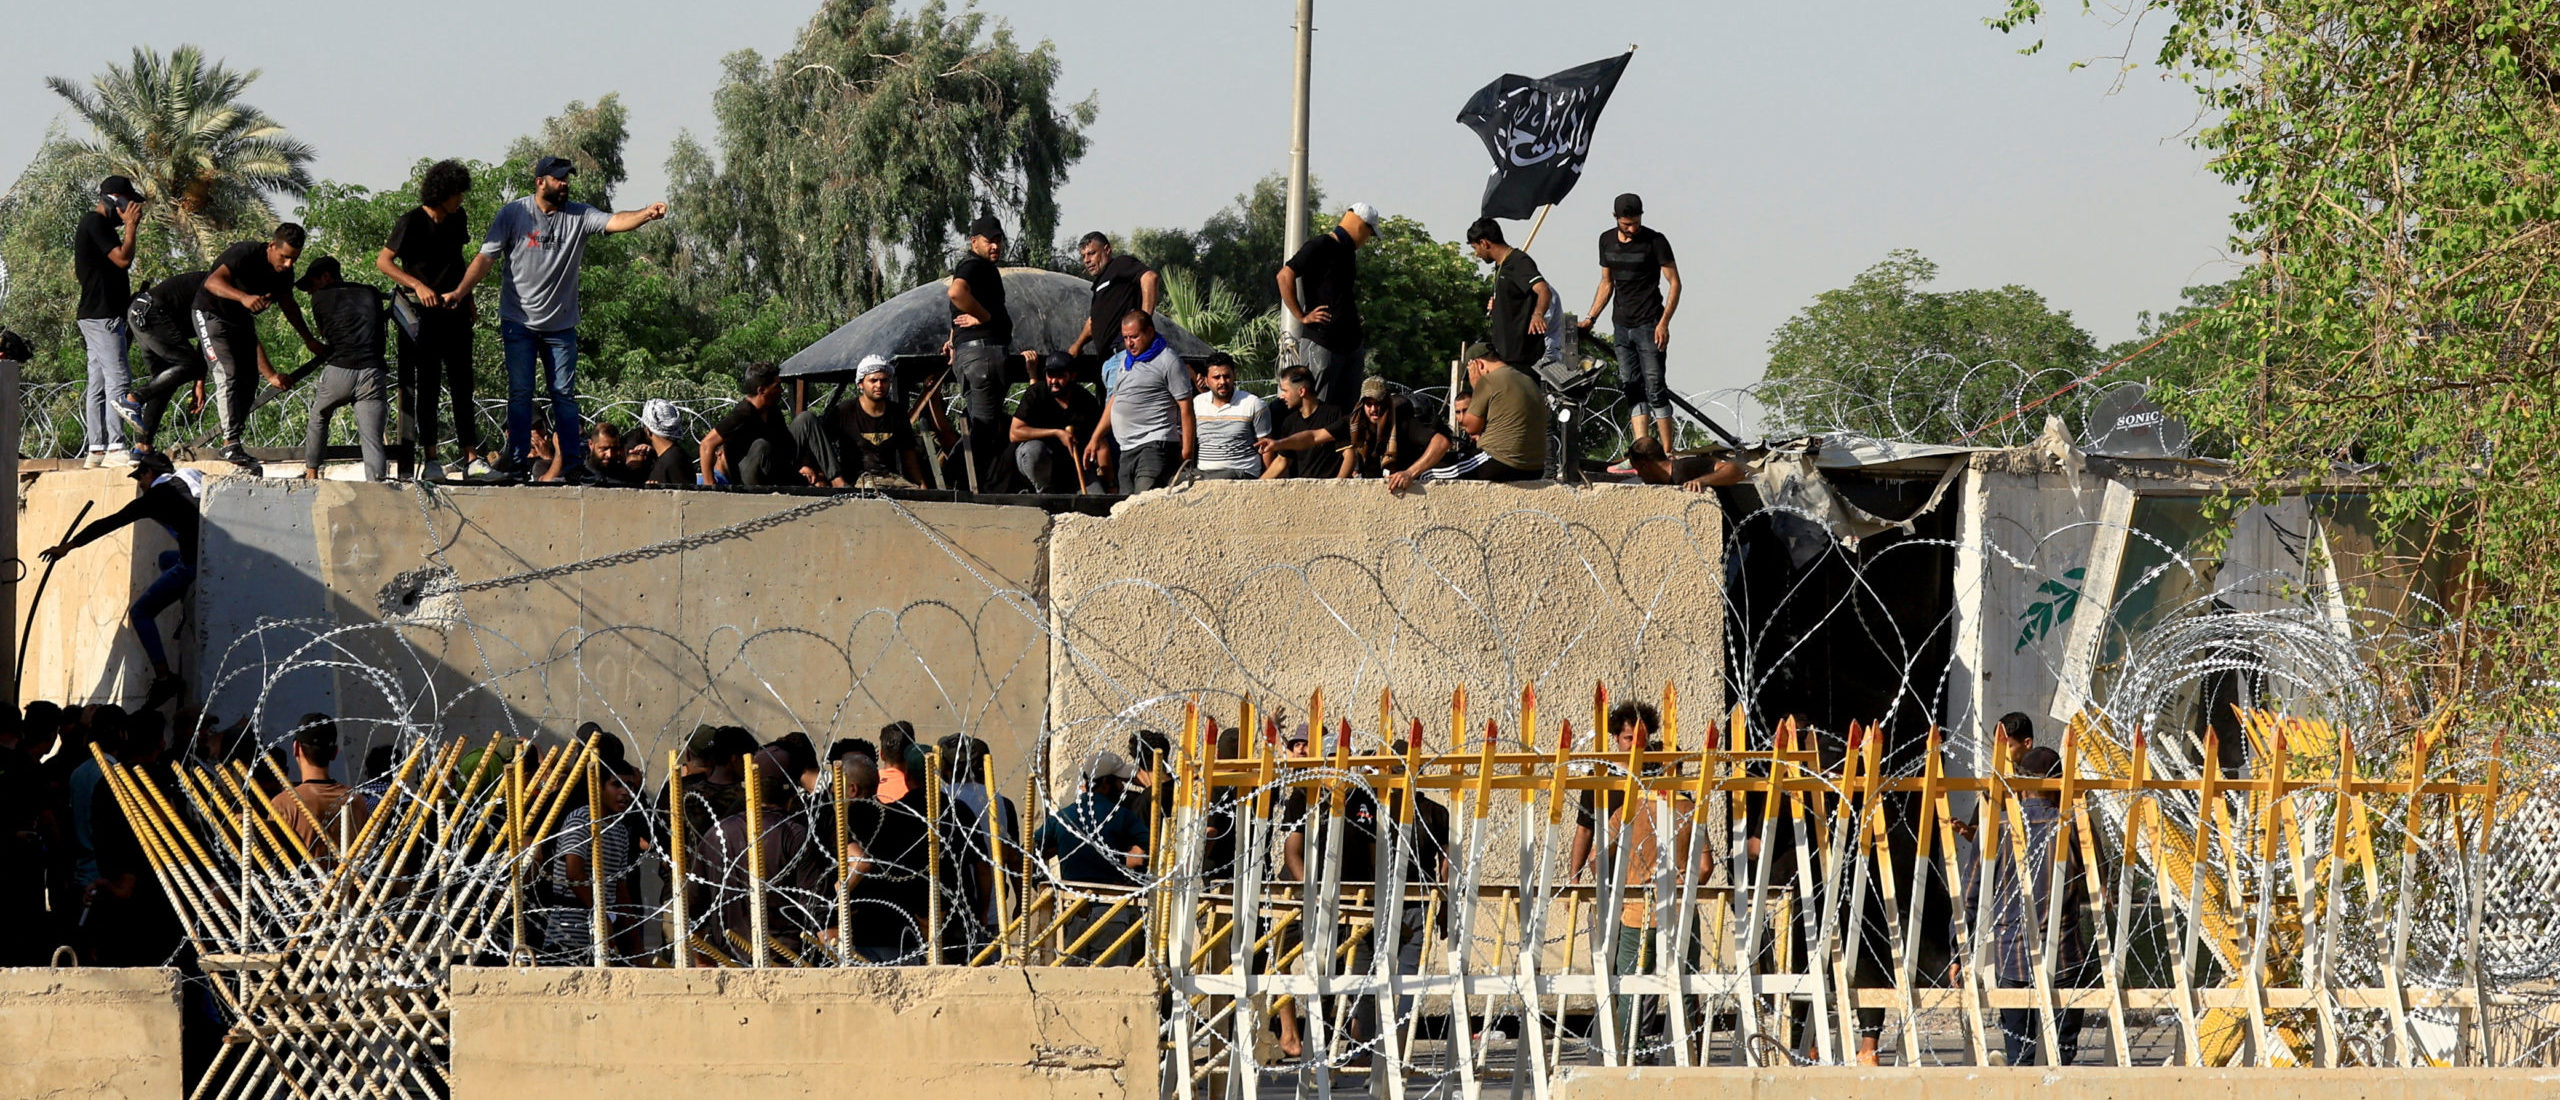 Protesters Storm Palace After Powerful Iraqi Cleric Quits, Multiple Deaths Reported